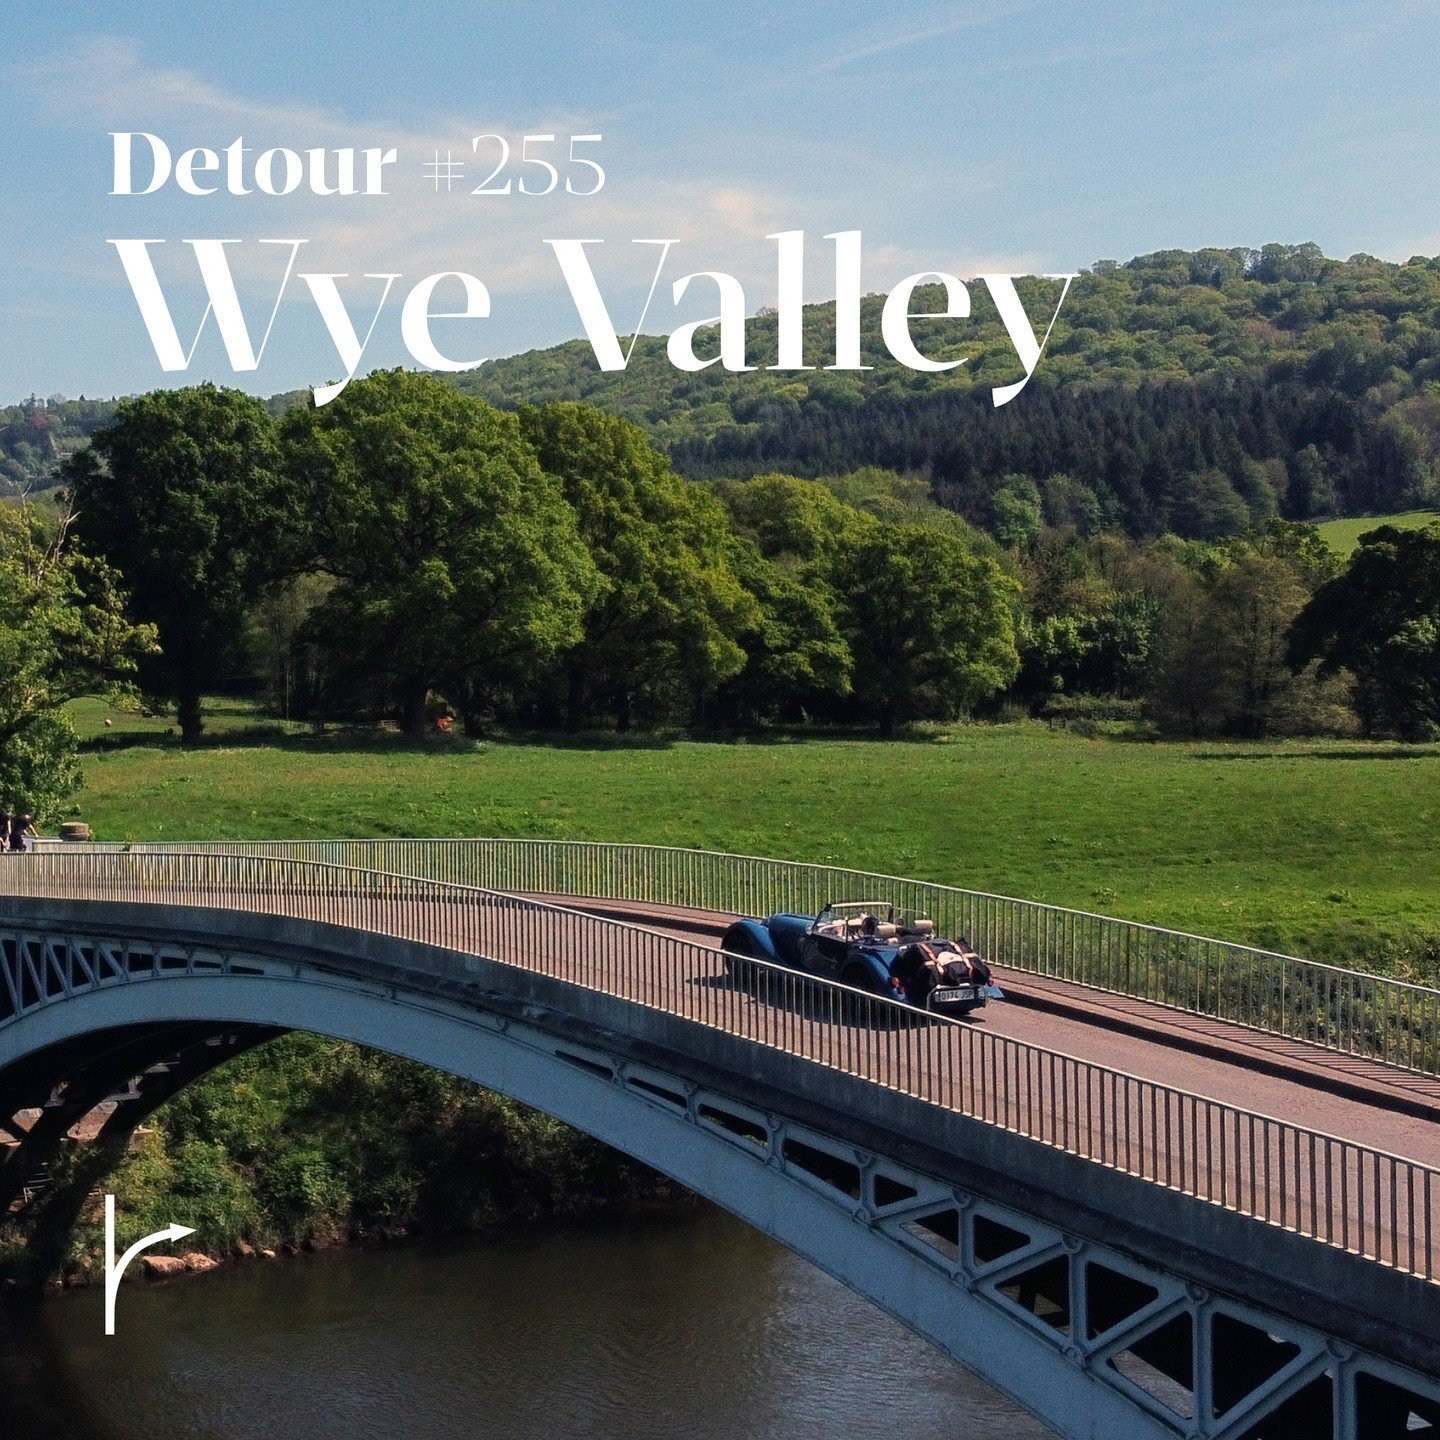 Did you know that the Wye Valley lays claim to being the first place ever described as &quot;picturesque&quot;?⁠
⁠
&quot;William Gilpin was truly one of the earliest Detourists. The Church of England cleric and schoolmaster was also a traveller, arti